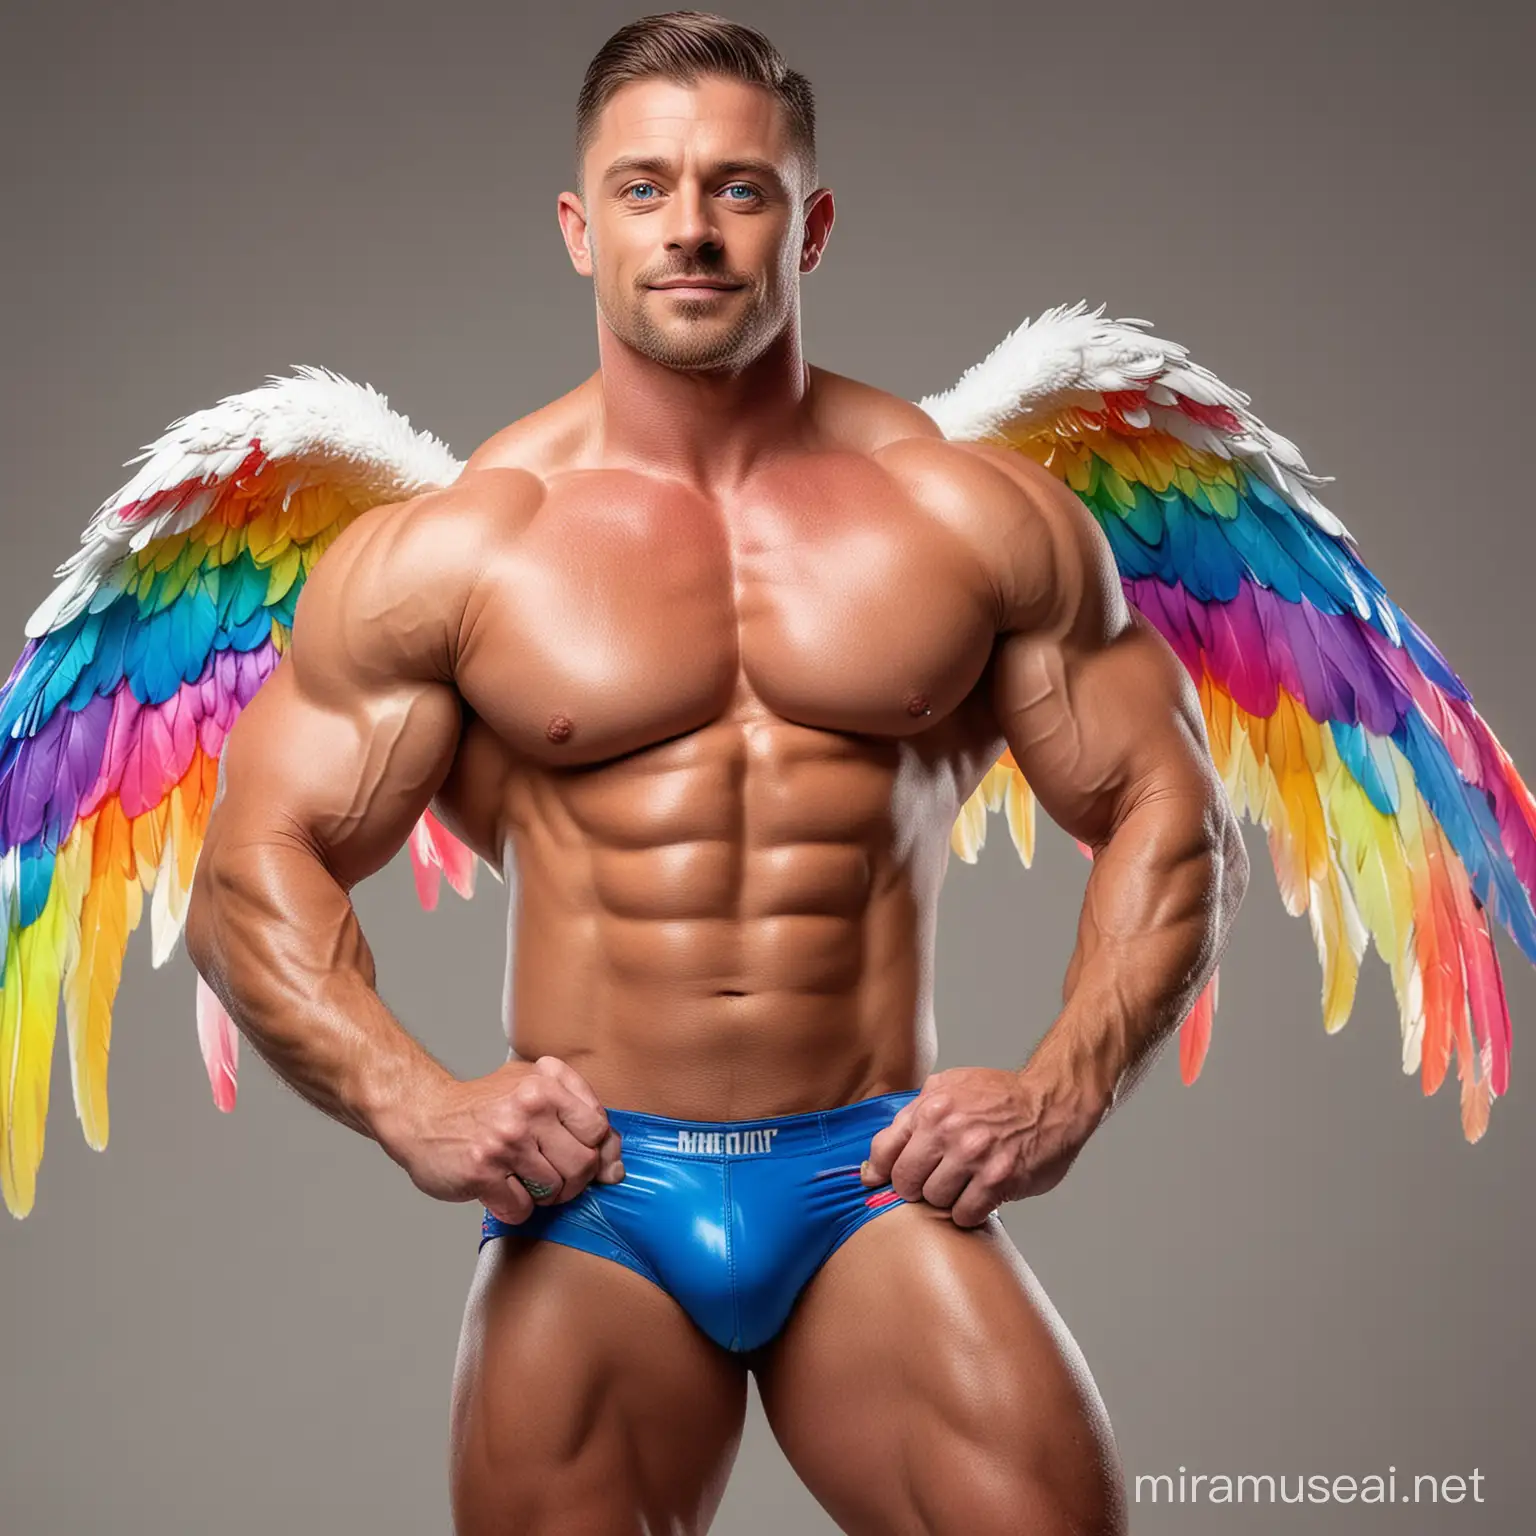 Studio Light Topless 30s Ultra Chunky Happy IFBB Bodybuilder Daddy with Beautiful Big Blue Eyes wearing Multi-Highlighter Bright Rainbow with white Coloured See Through Eagle Wings Shoulder LED Jacket Short shorts left arm Flexing Bicep Up Pose seating on